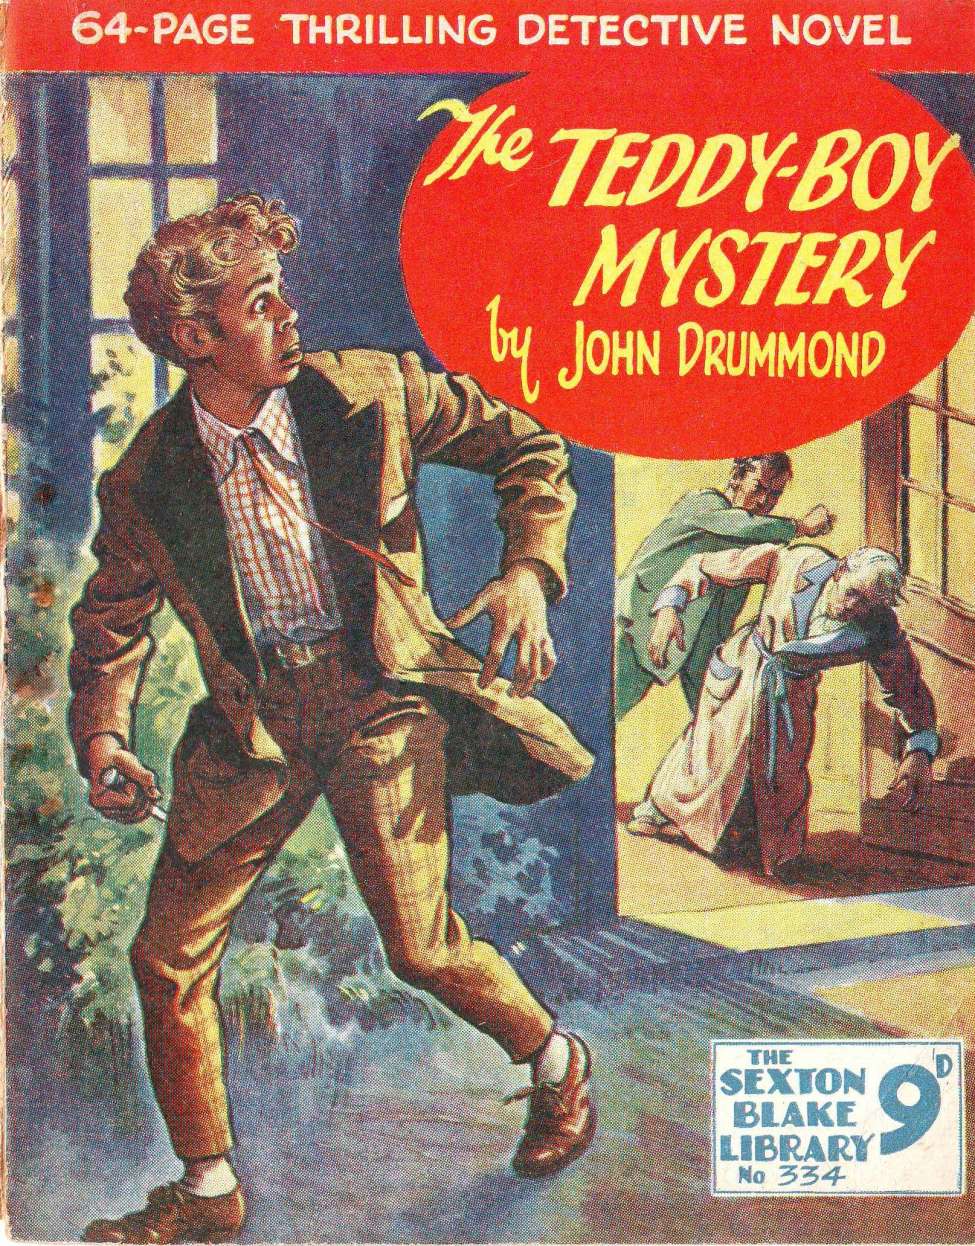 Book Cover For Sexton Blake Library S3 334 - The Teddy-Boy Mystery